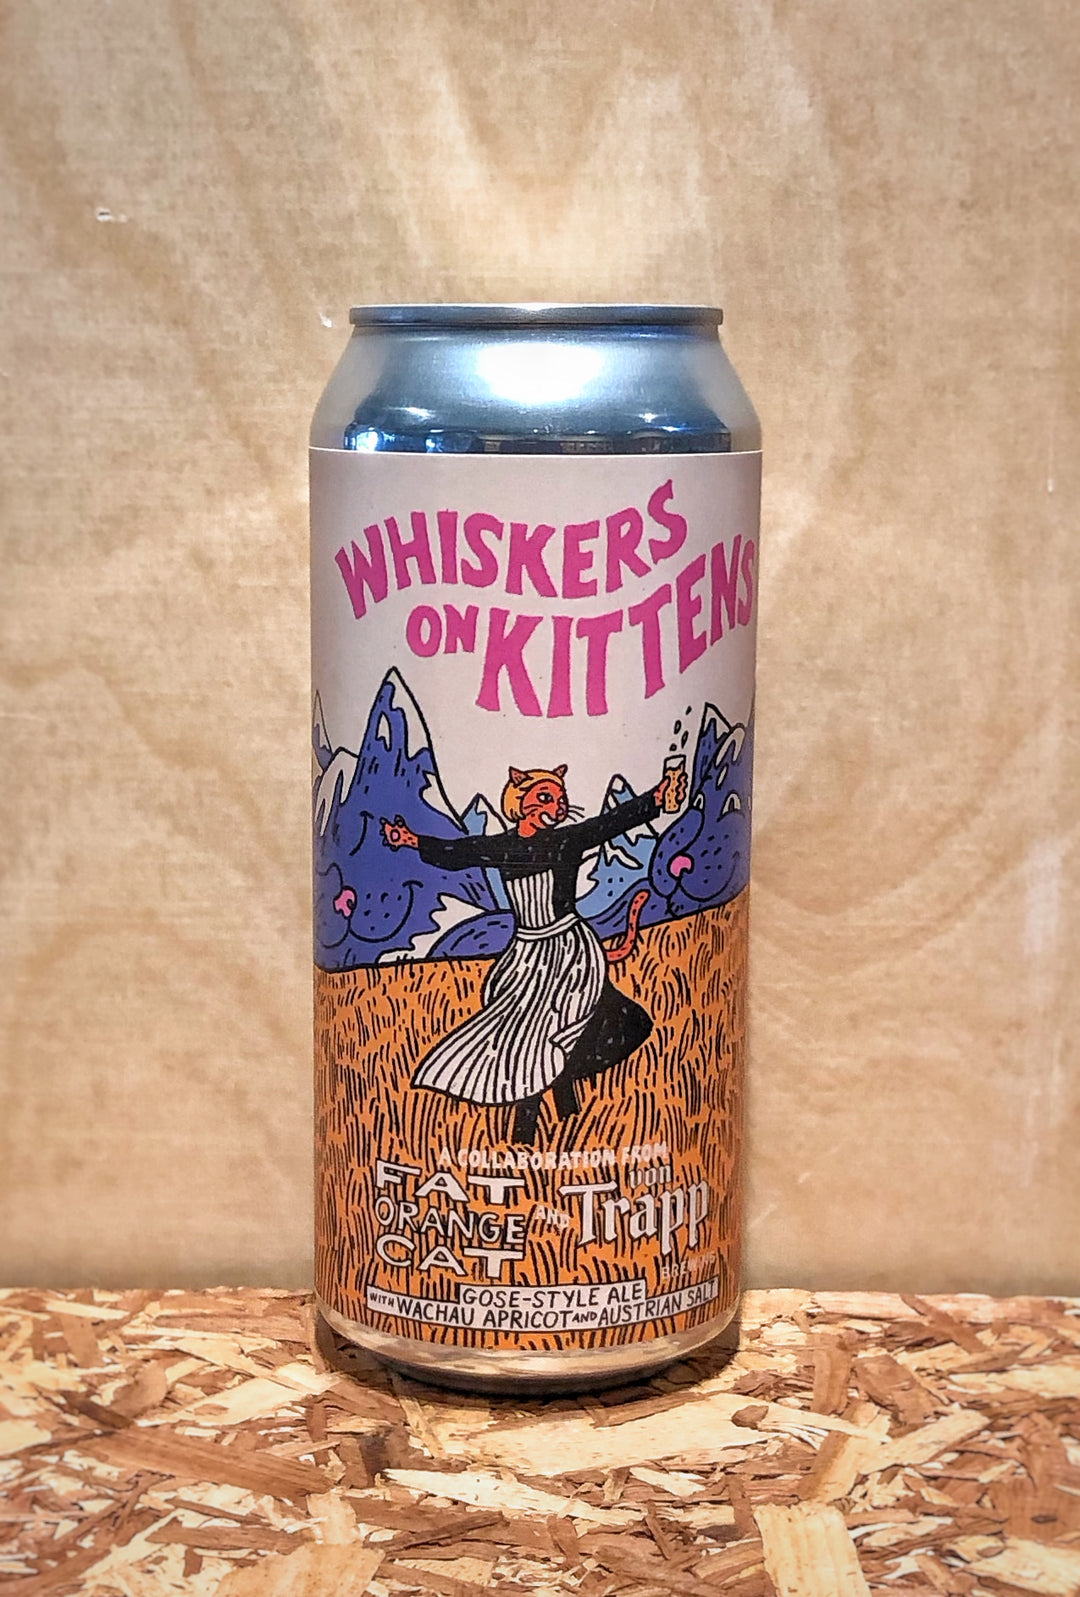 Fat Orange Cat 'Whiskers on Kittens' Gose Style Ale with Wachau Apricot and Austrian Salt (North Haven, CT)